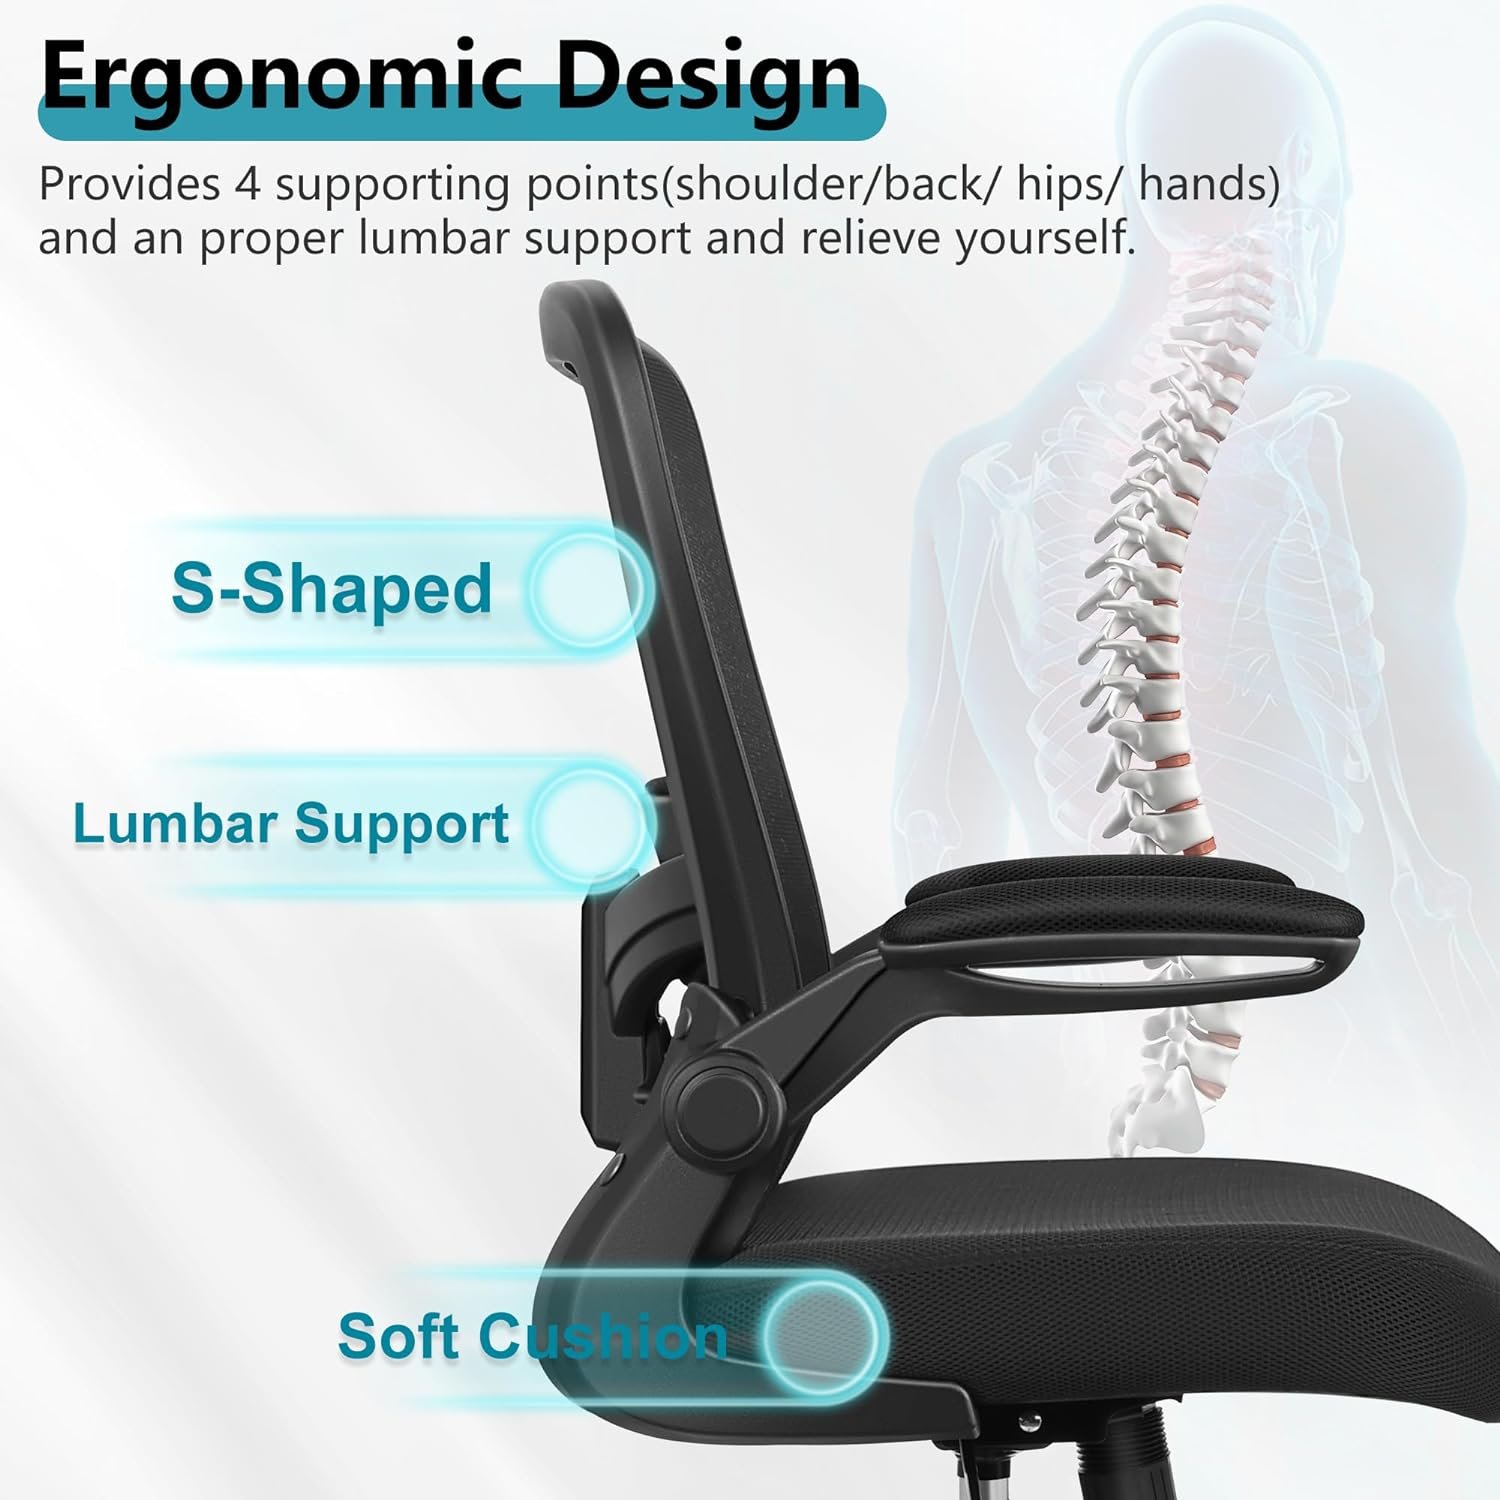 FelixKing Ergonomic Office Chair with Adjustable High Back, Breathable Mesh, Lumbar Support, Flip-up Armrests, Executive Rolling Swivel Comfy Task Computer Chair for Home Office (Black)